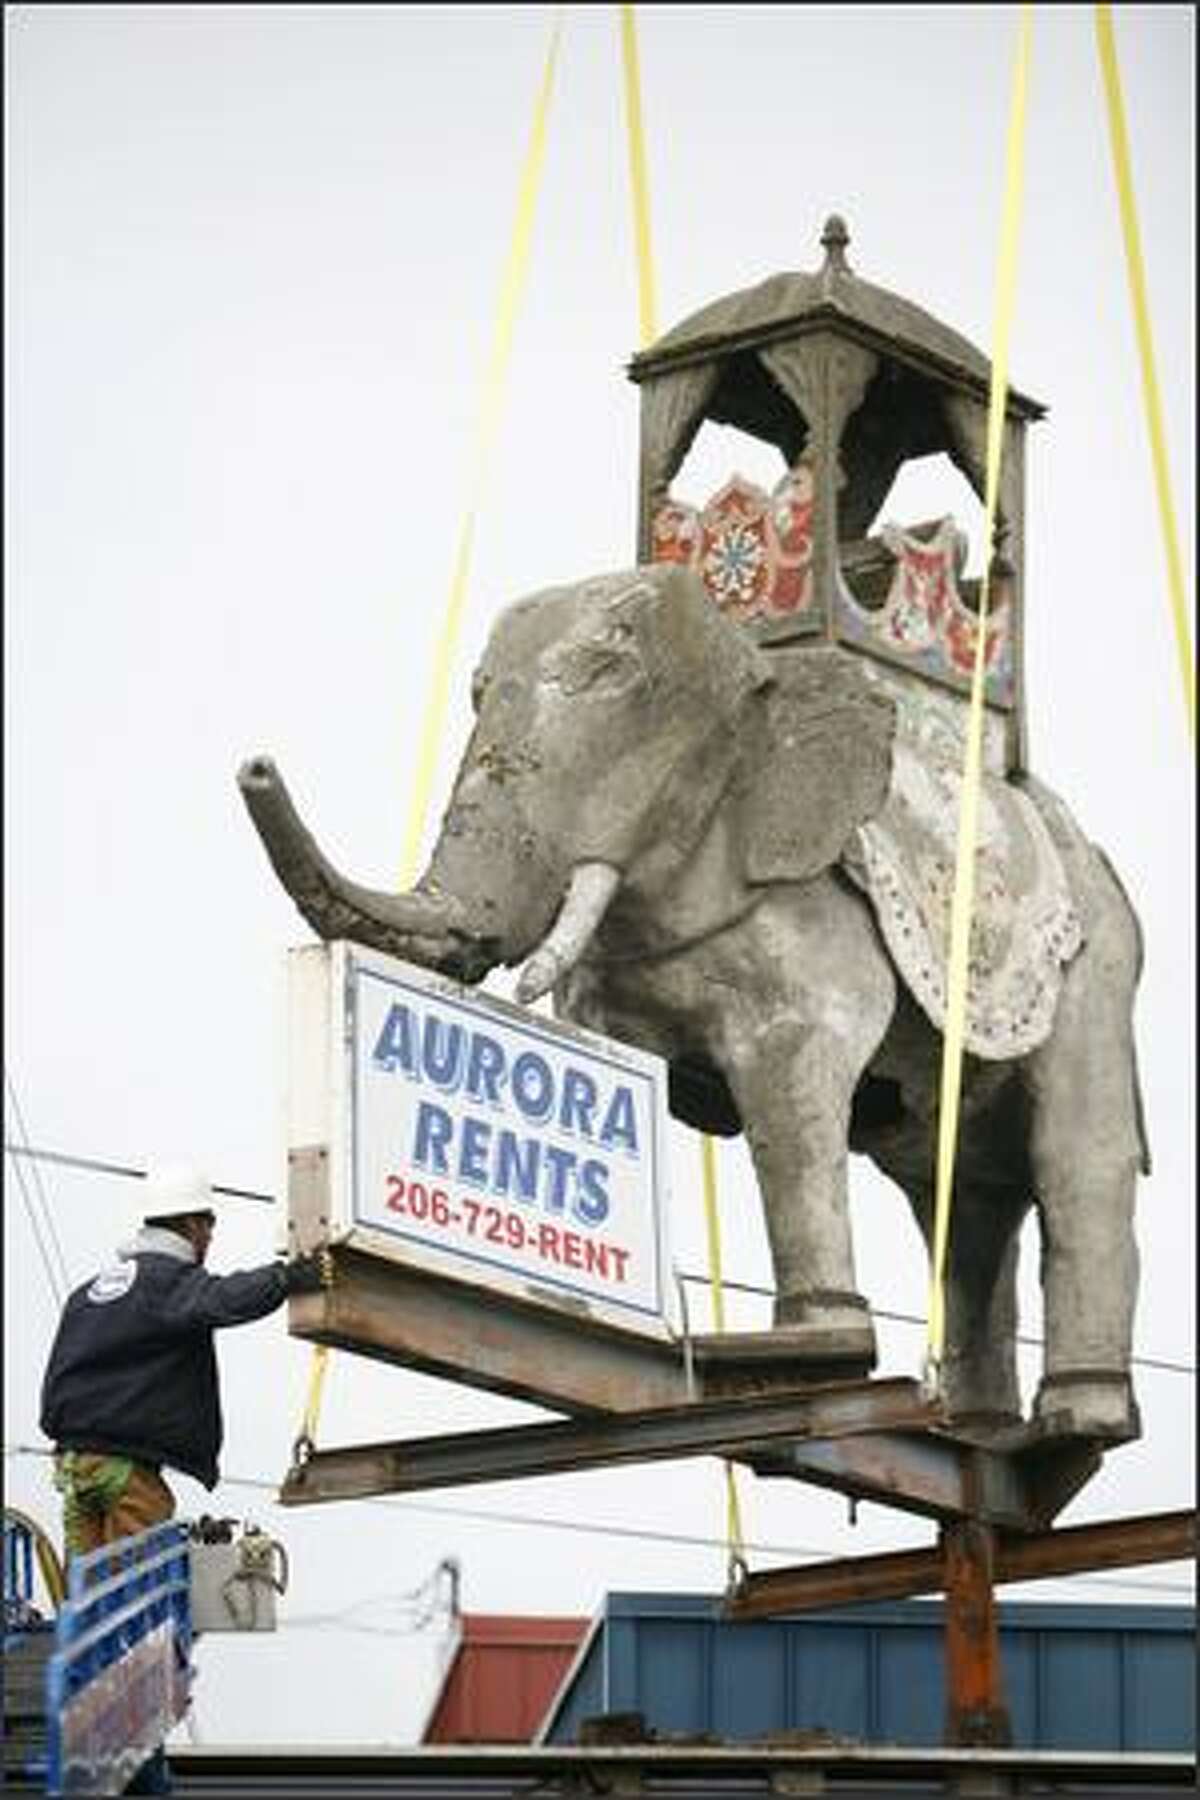 Chris Beasley with Shoreline Sign and Awning guides the 8,400 pound concrete elephant in front of Aurora Rents in north Seattle.